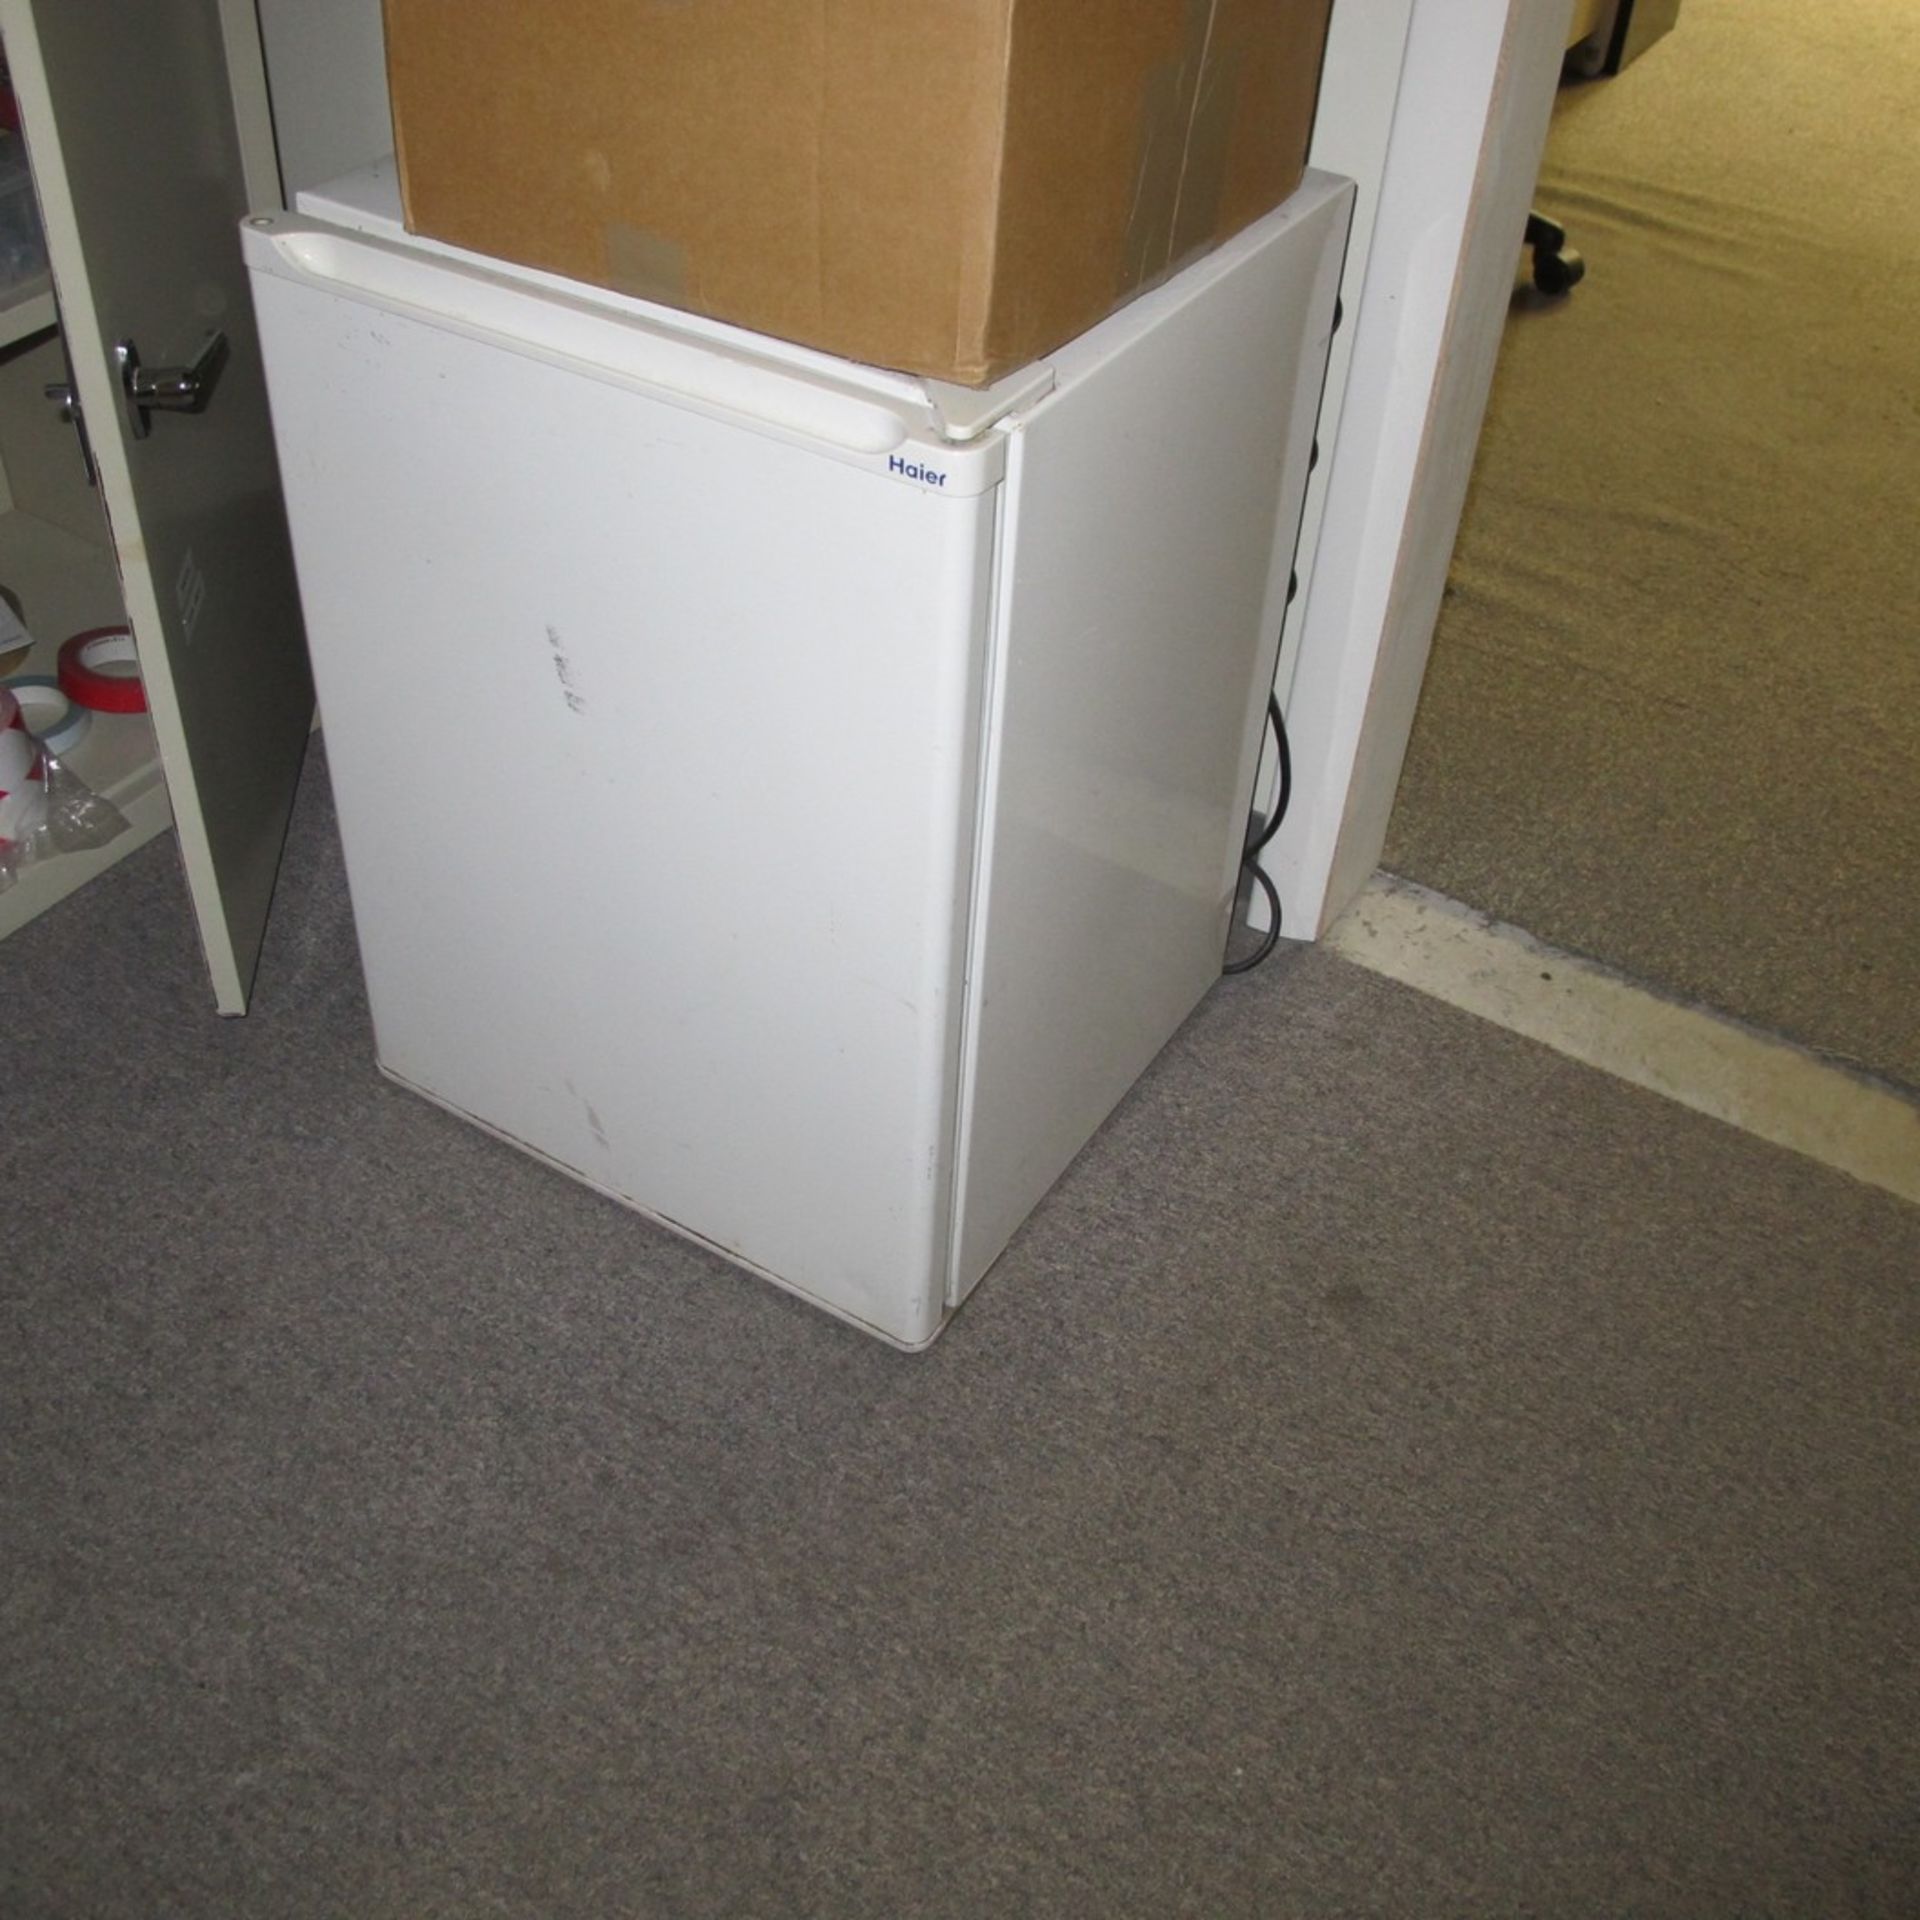 DESK, CHAIR, (2) FILE CABINETS, BAR FRIDGE (NO CONTENTS - FURNITURE ONLY) (UPPER OFFICES) - Image 2 of 2